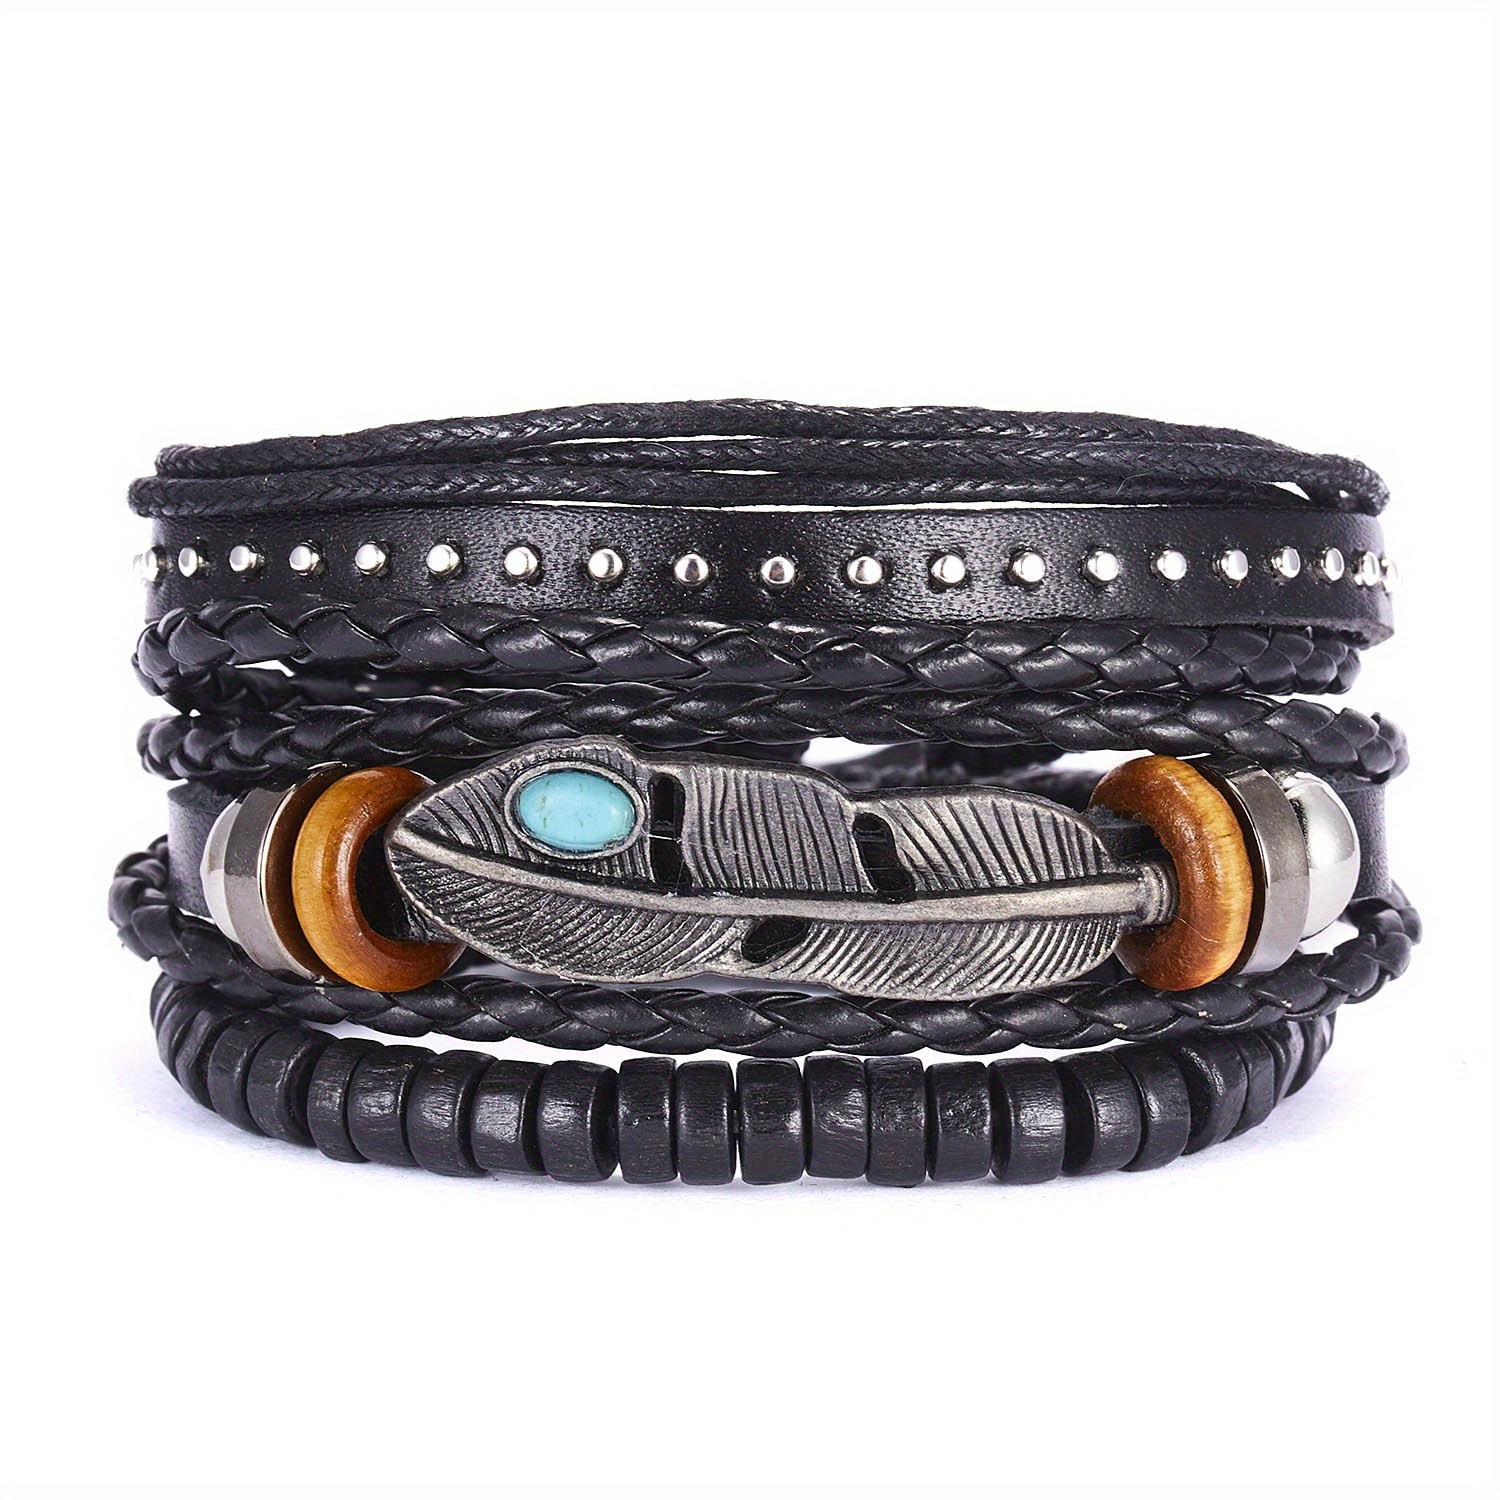 Pack of 4 Bracelets Leather Braided Bangle Hand Jewelry Party